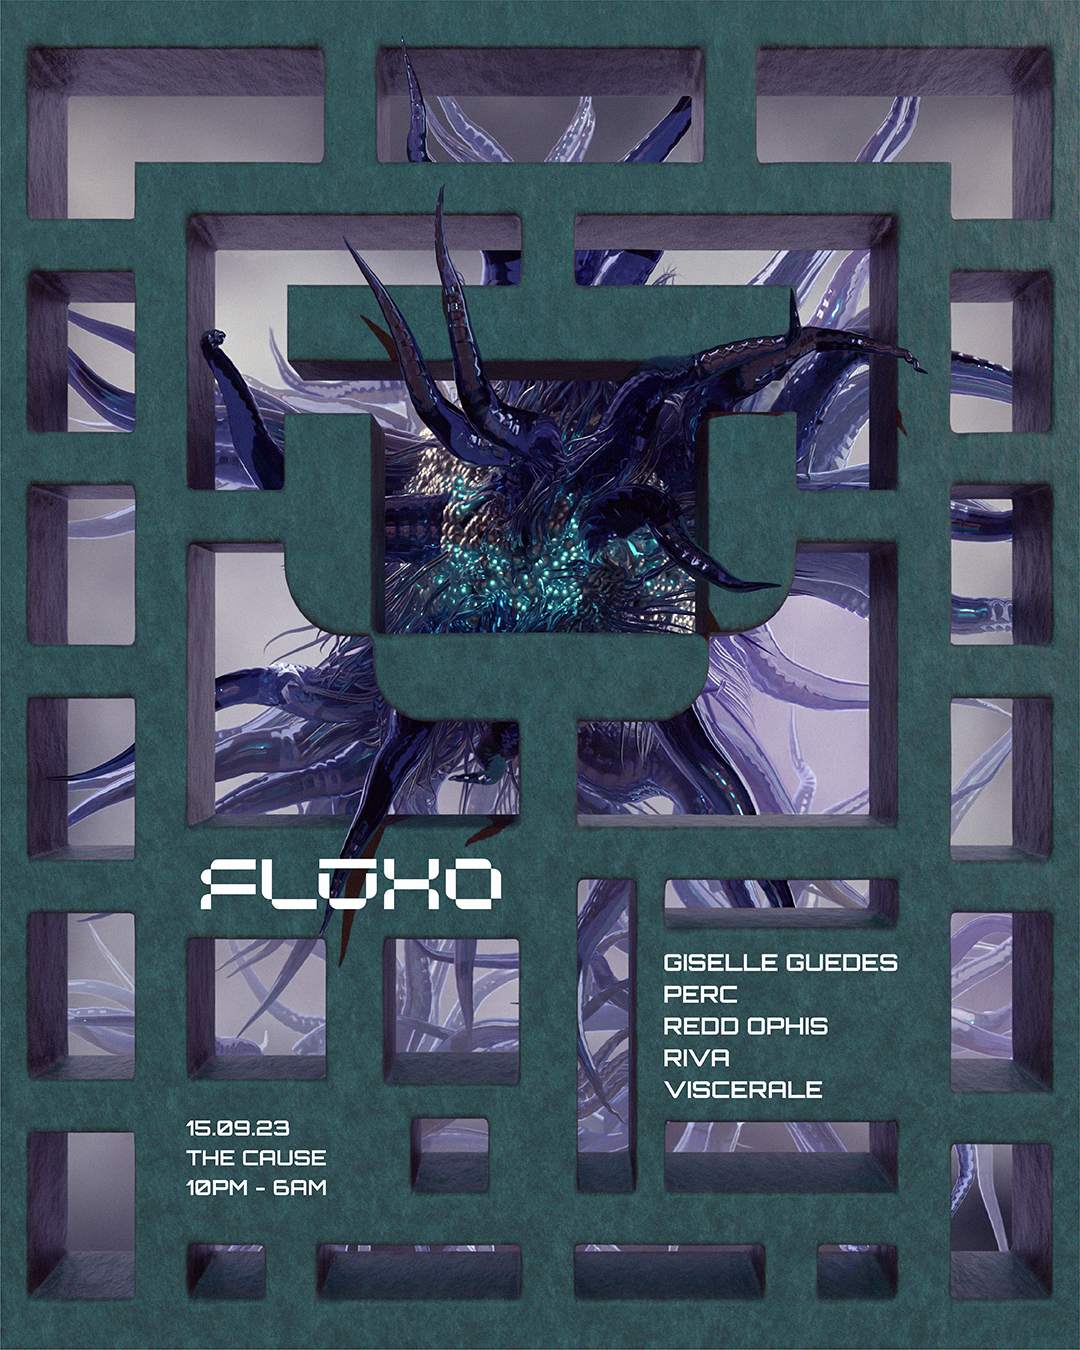 FLŪXO: Perc, Viscerale, Giselle Guedes, Riva & Redd Ophis - Página trasera